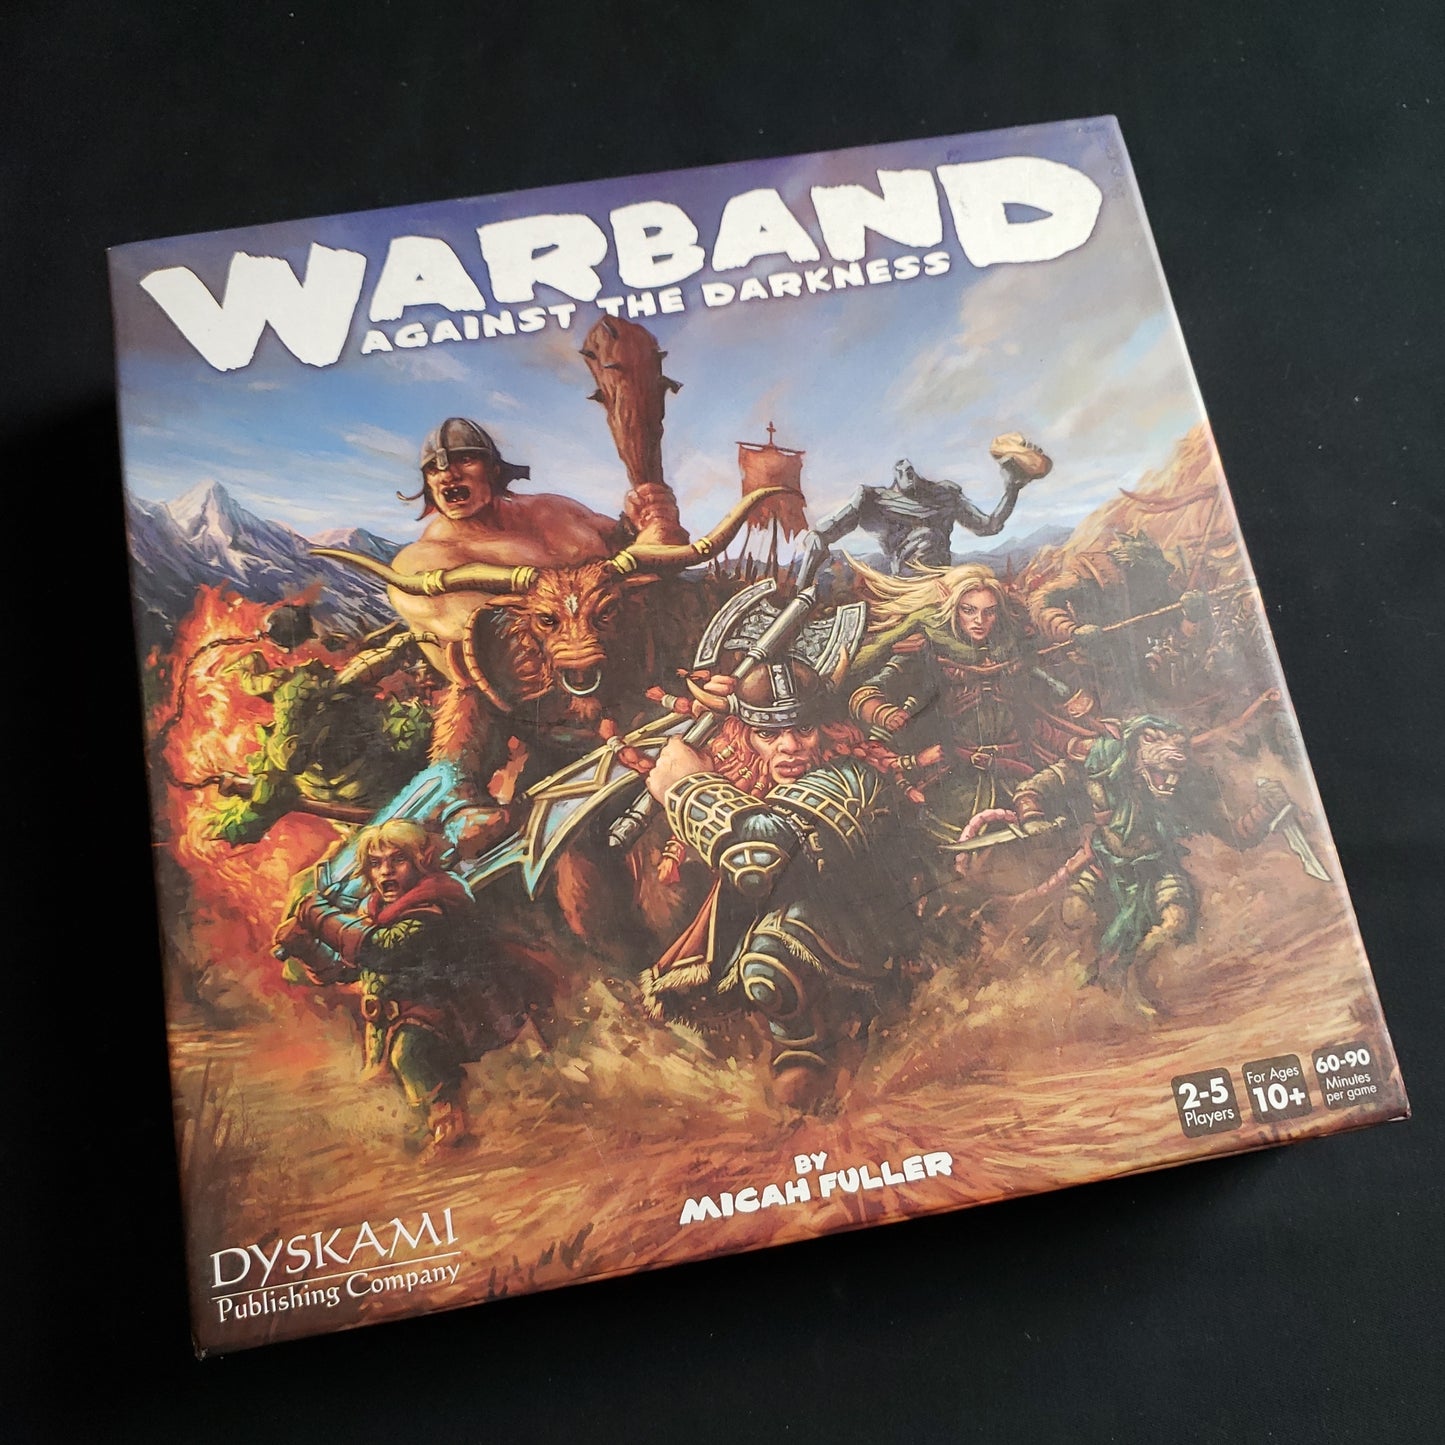 Image shows the front cover of the box of the Warband: Against the Darkness board game